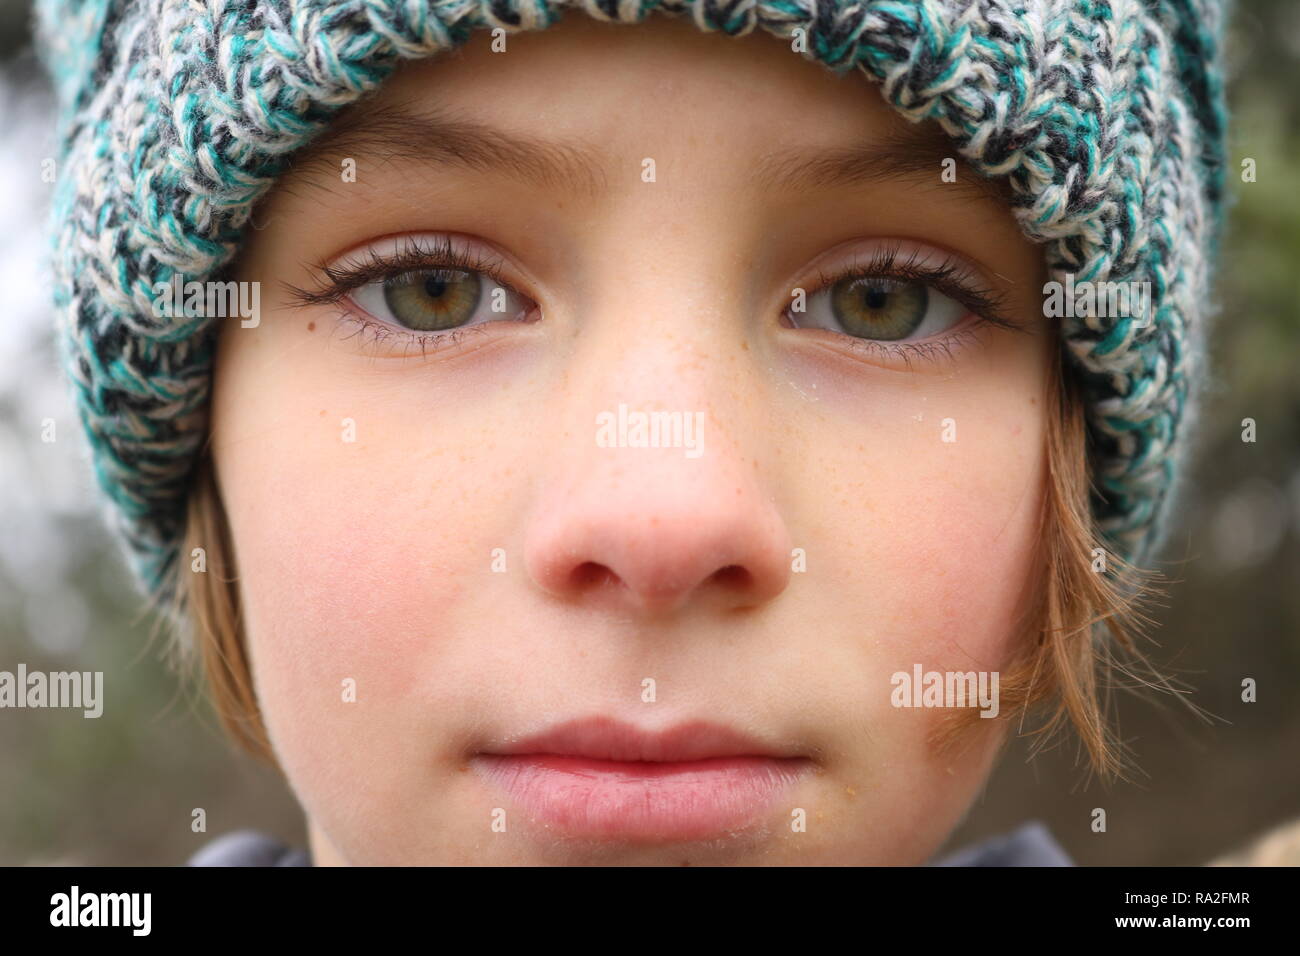 Closeup of a green eyed girl with a pensive stare wearing a winter hat Stock Photo